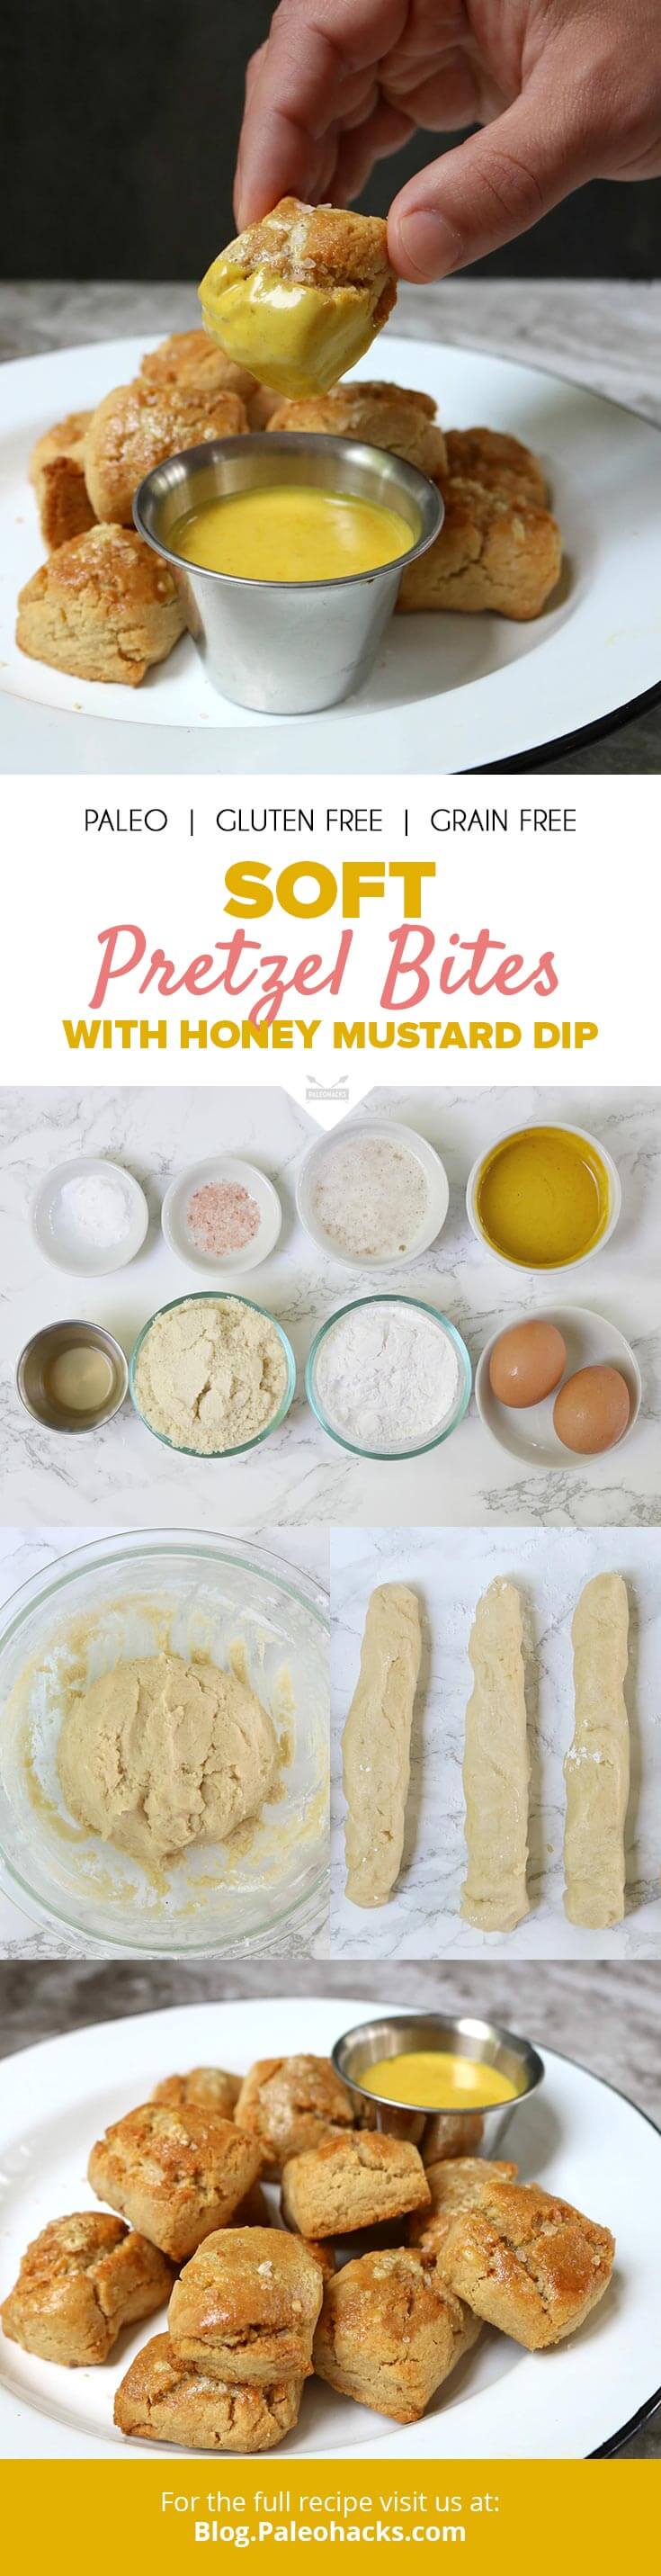 When a carb craving strikes, whip up a batch of these gluten-free, soft pretzel bites with a honey mustard dipping sauce (you’re welcome!).